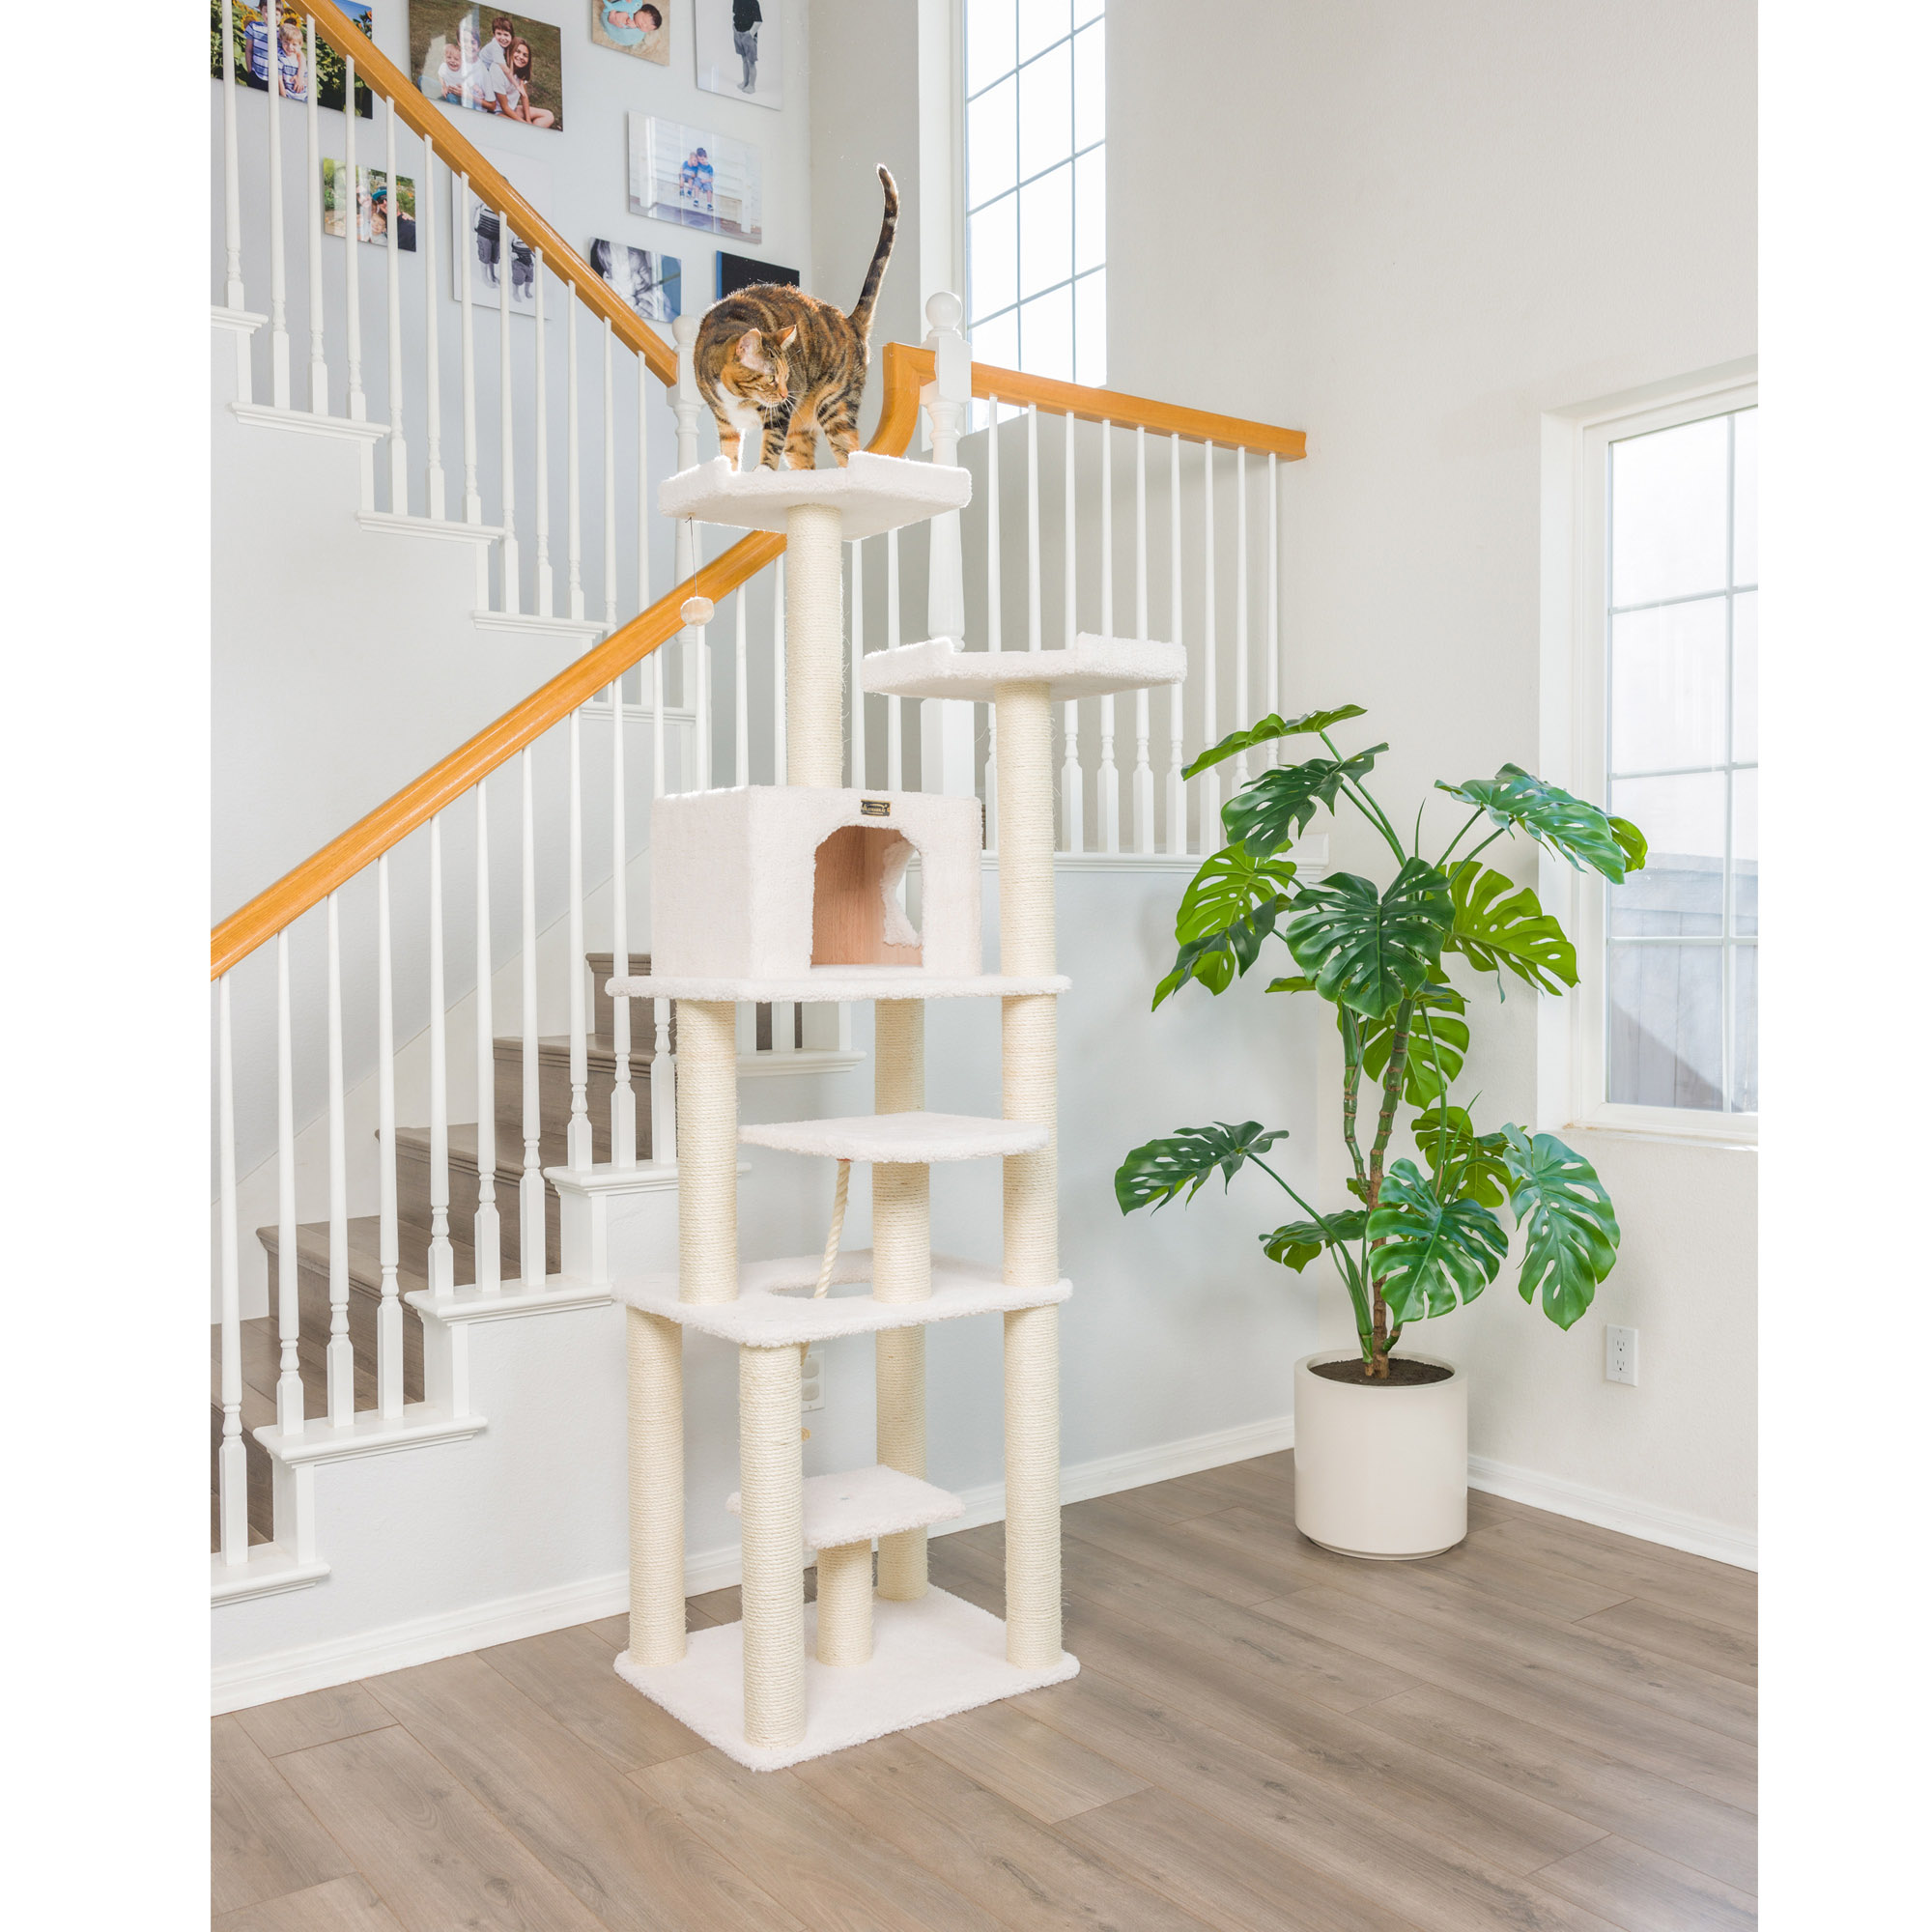 Armarkat 78-in real wood Cat Tree & Condo Scratching Post Tower, Beige - image 3 of 10